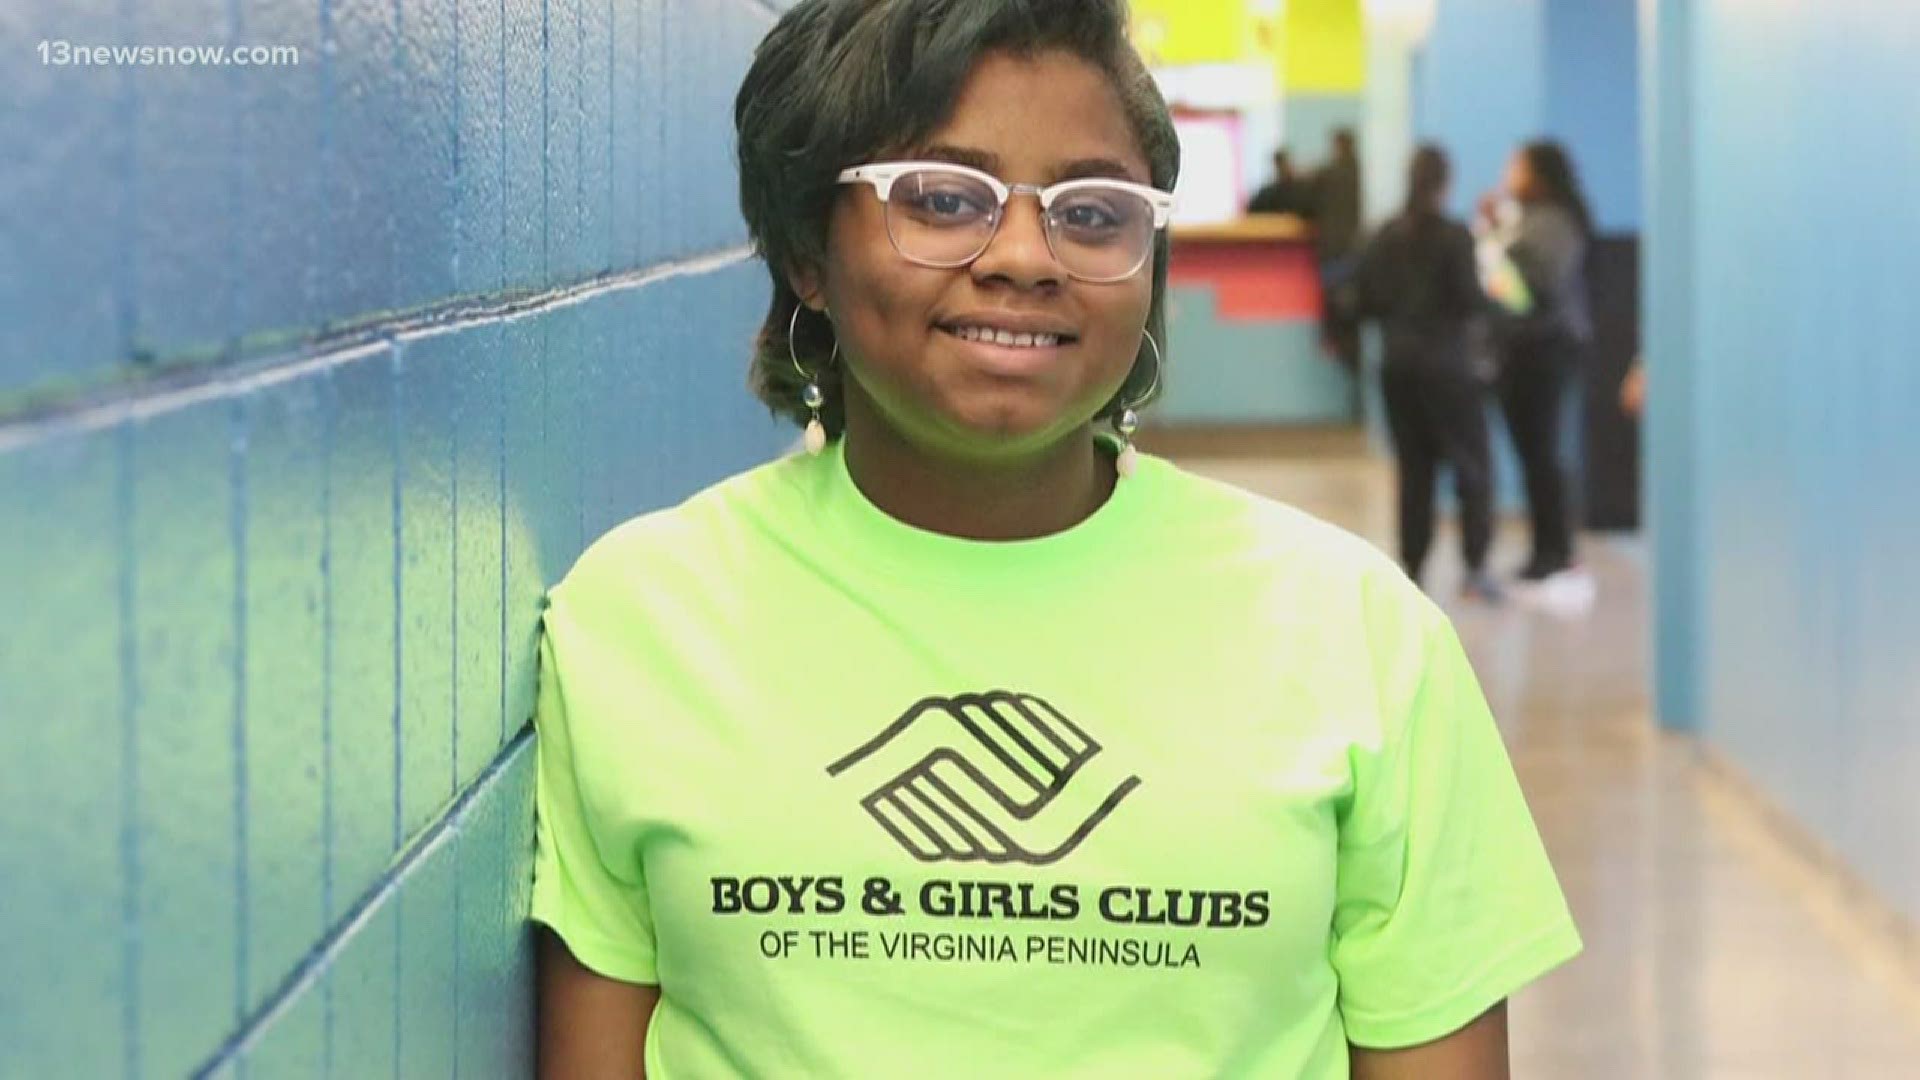 Boys & Girls Clubs of the Virginia Peninsula inspires thousands of youth every year to reach their full potential. Donate now to support the group amid the crisis.